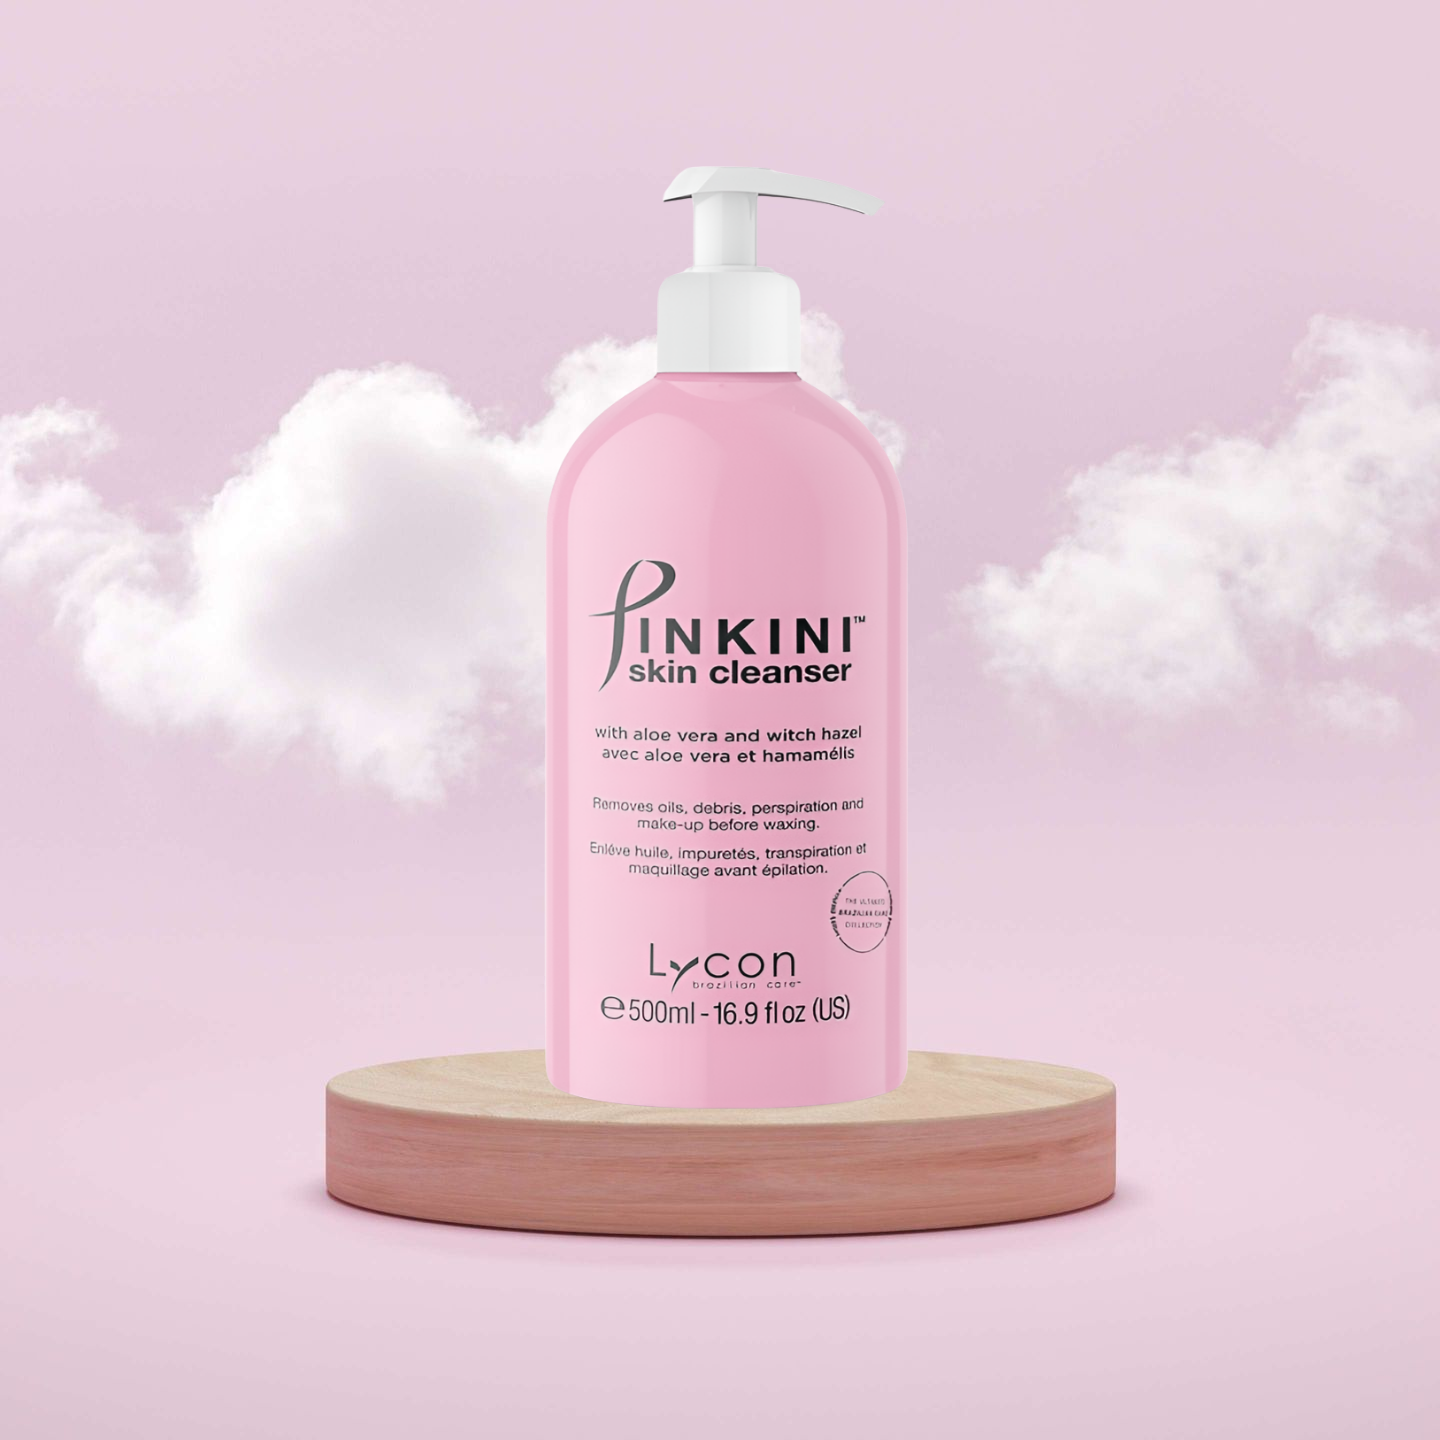 Lycon Pinkini Skin Cleanser